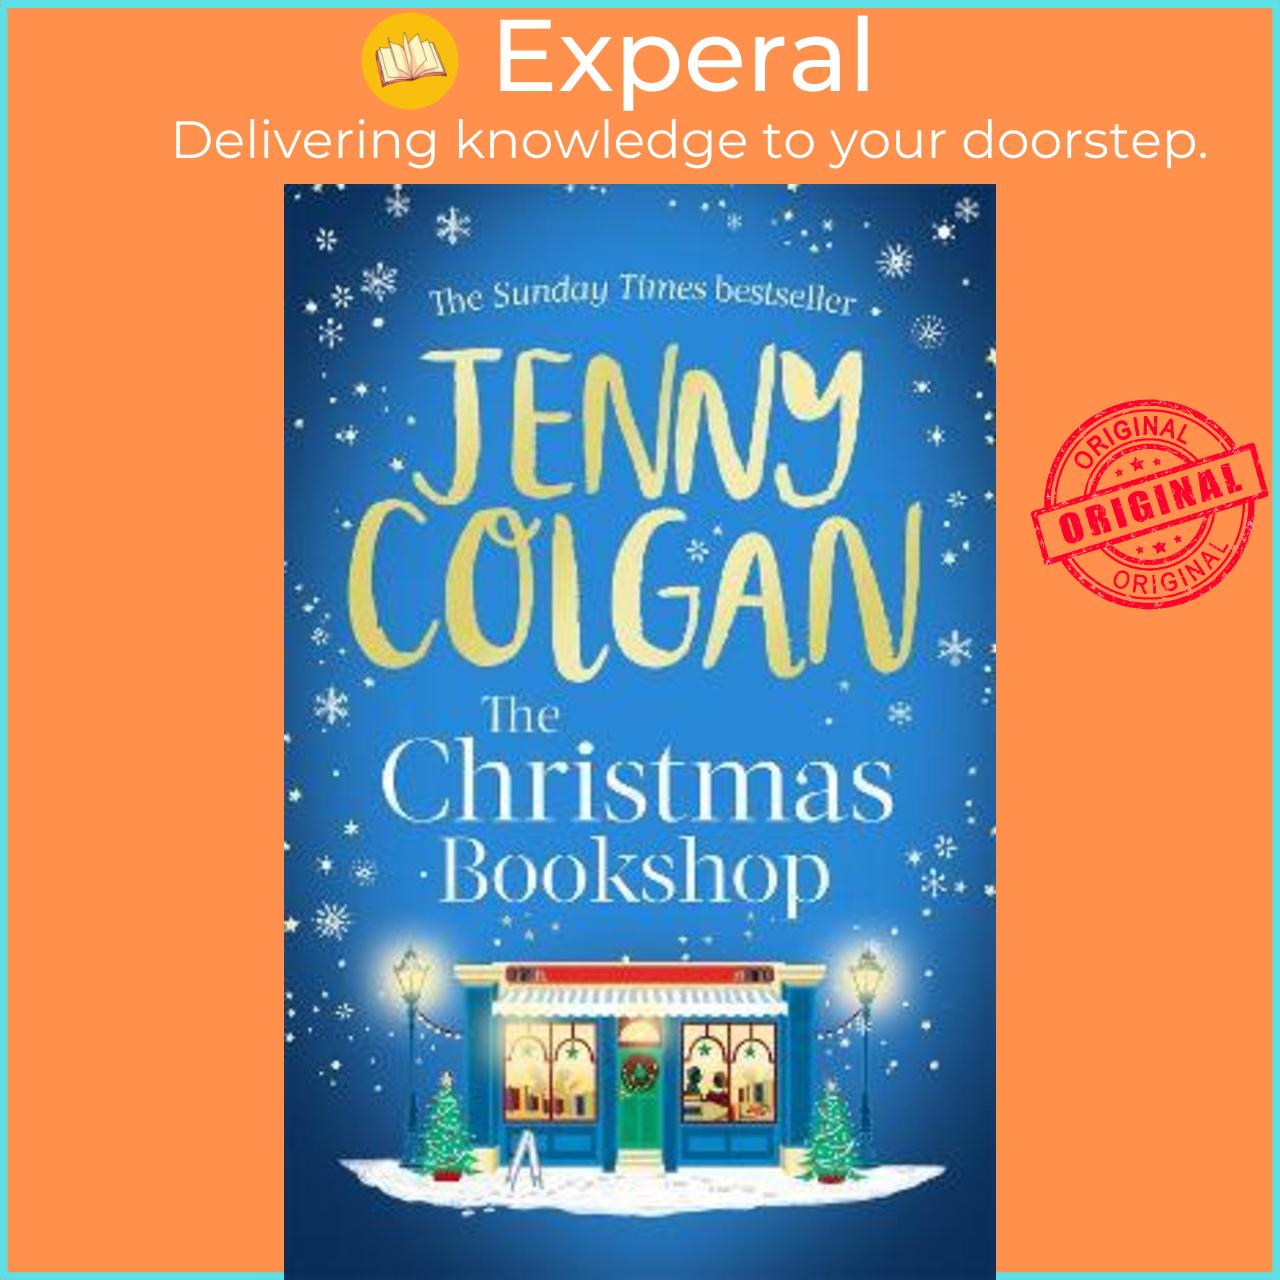 Sách - The Christmas Bookshop : the cosiest and most uplifting festive romance t by Jenny Colgan (UK edition, paperback)